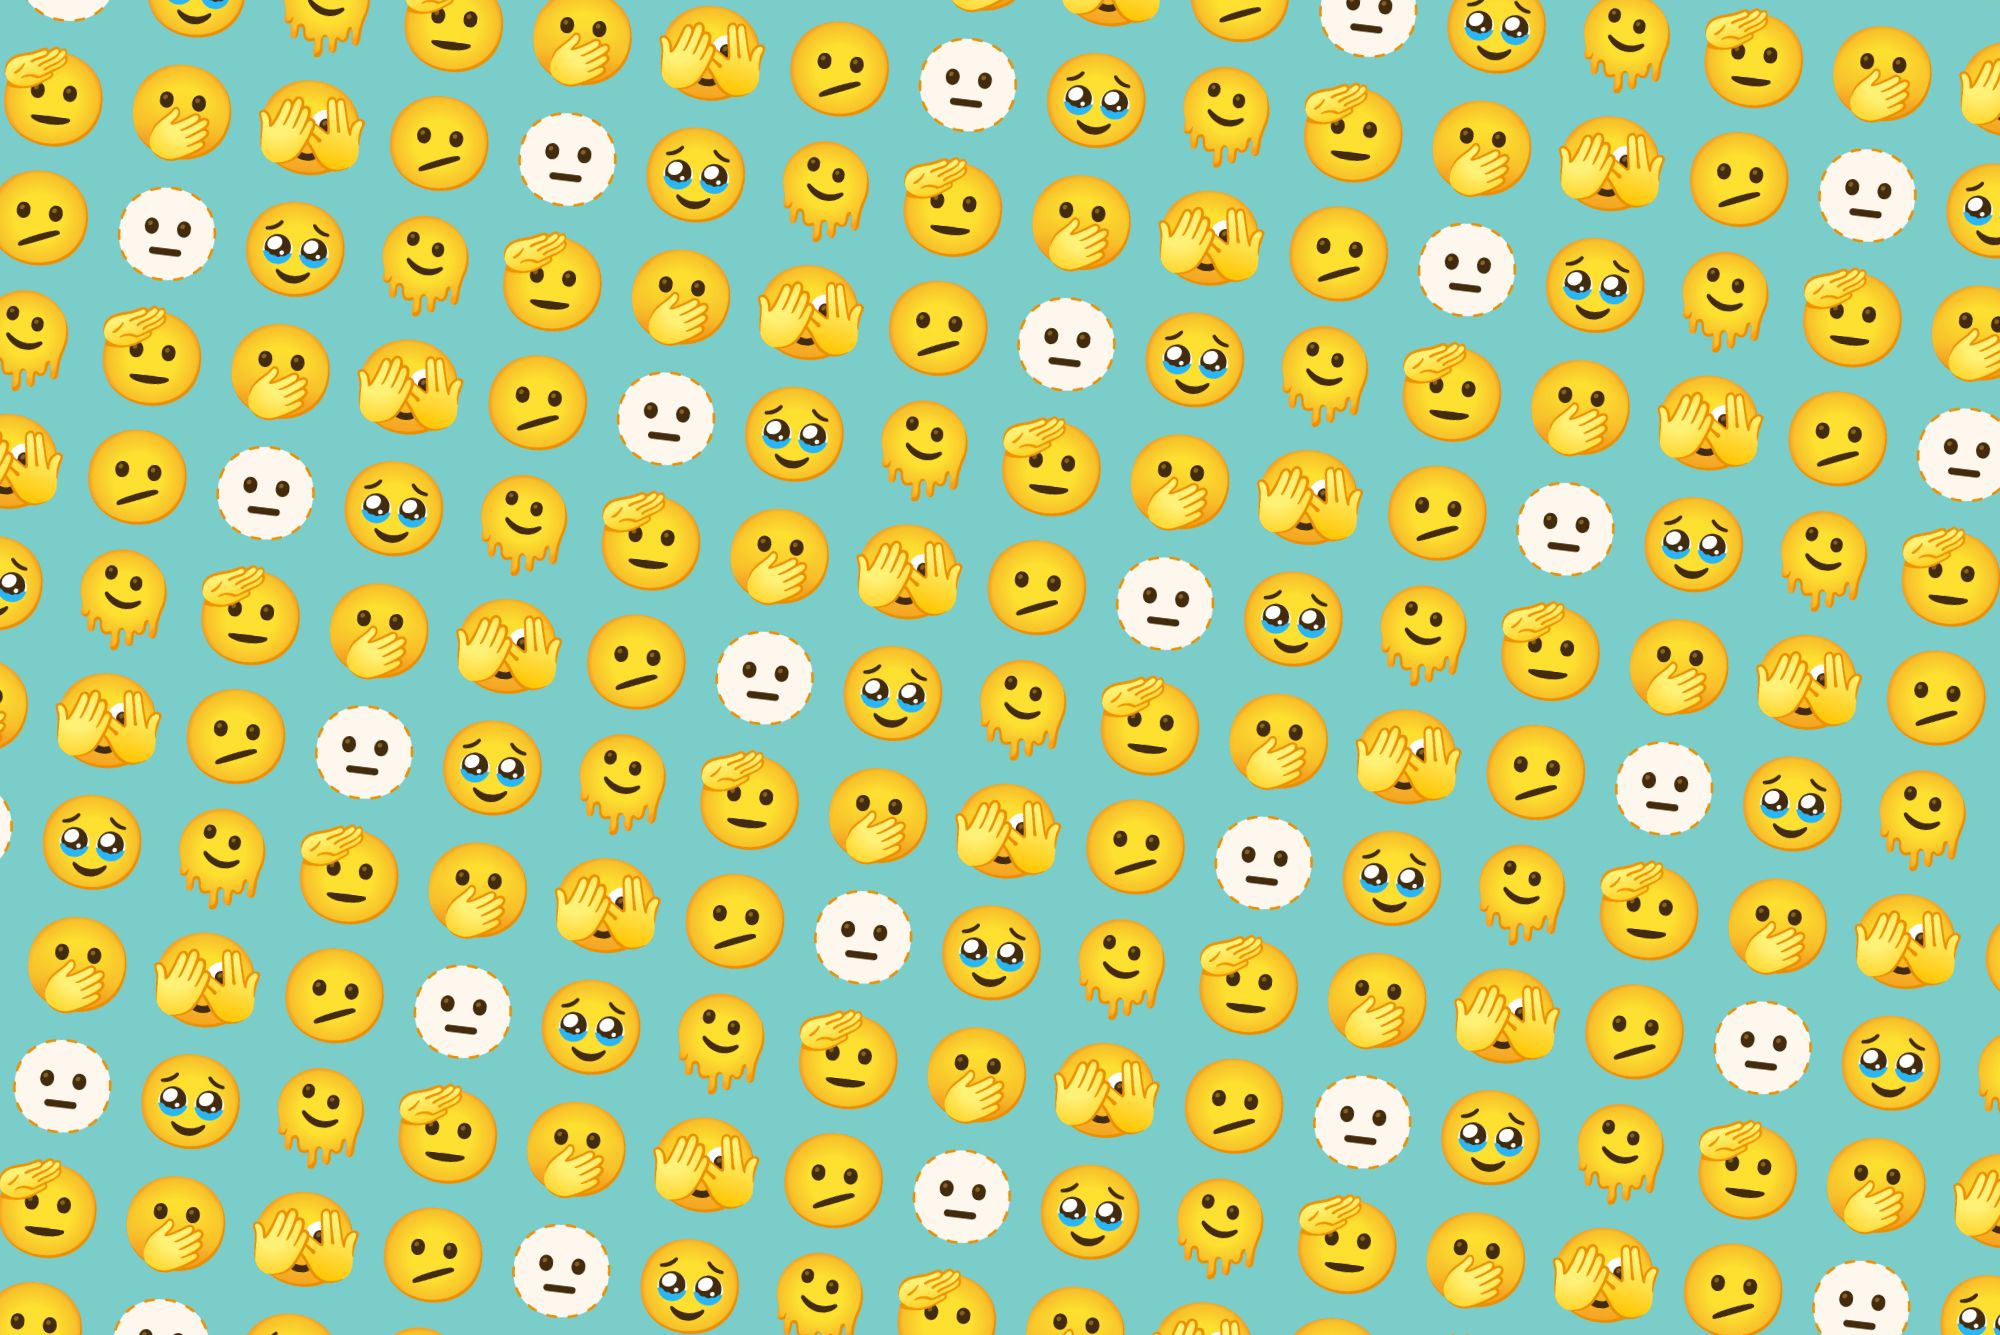 First Look: Google's Emoji 14.0 Support in Android 12L